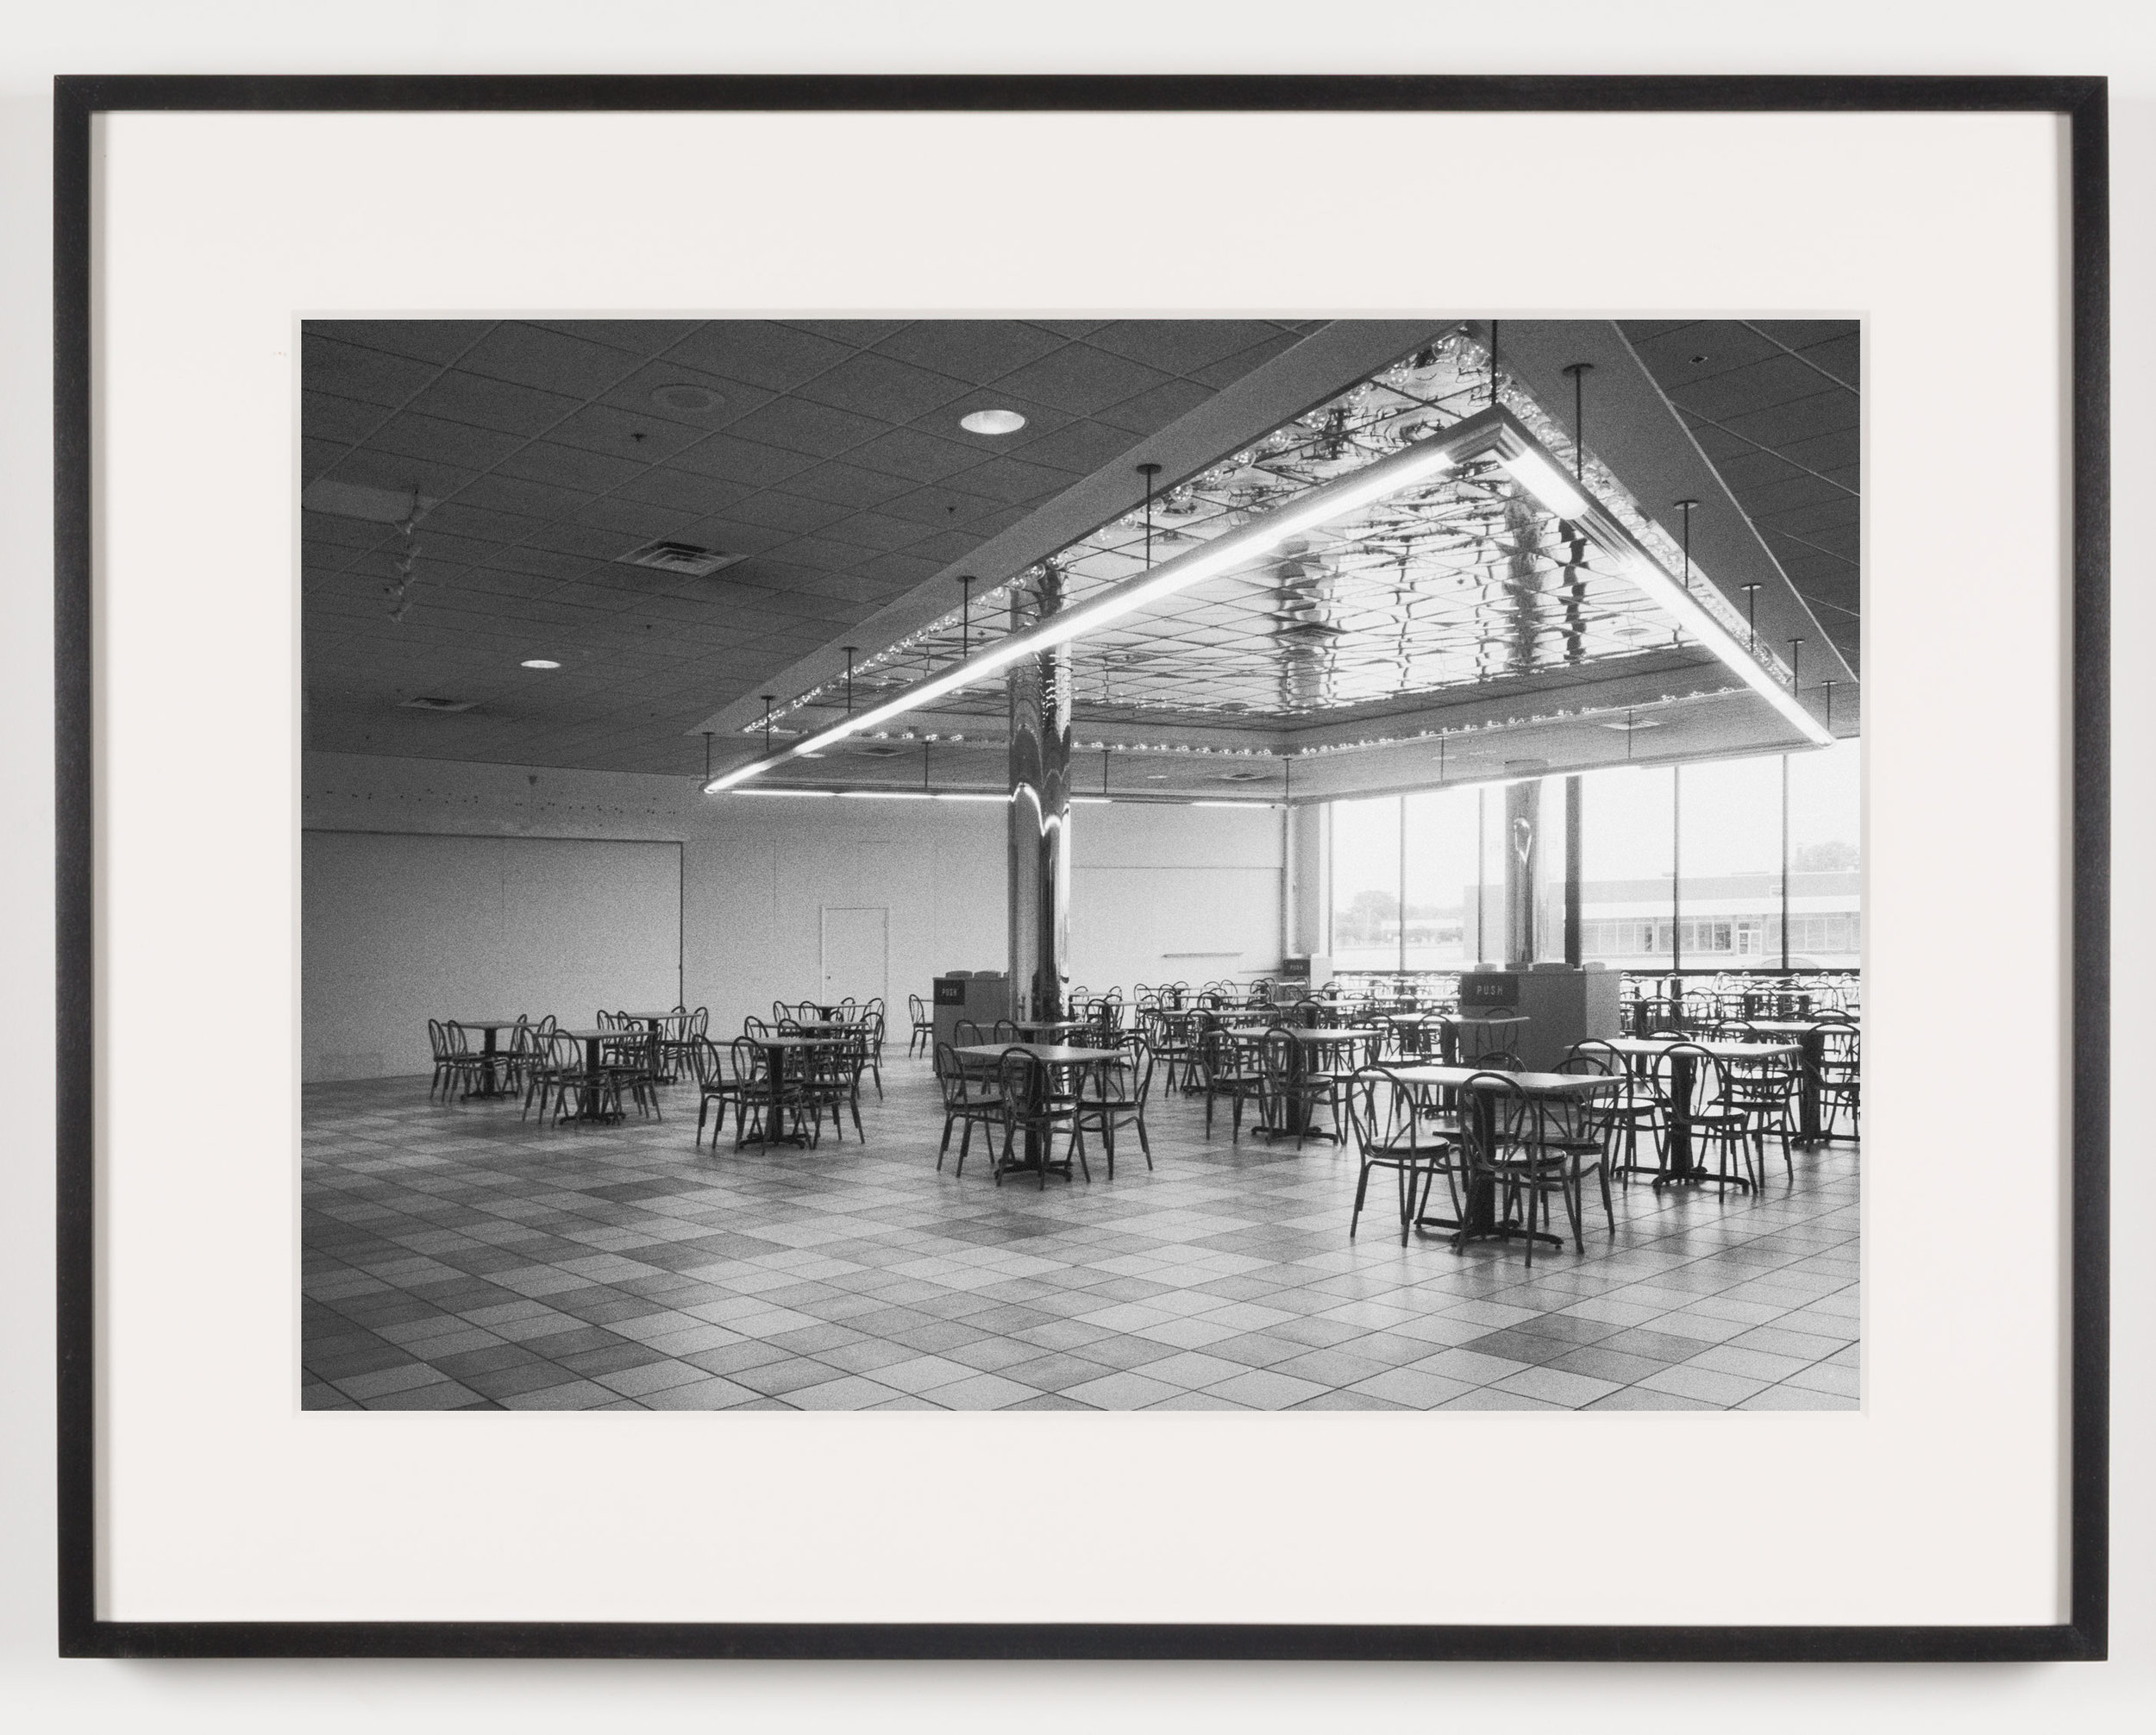   Southwyck Mall (View of Food Court), Toledo, OH, Est. 1972, Demo. 2009   2011  Epson Ultrachrome K3 archival ink jet print on Hahnemühle Photo Rag paper  21 5/8 x 28 1/8 inches   American Passages, 2001–2011    A Diagram of Forces, 2011     